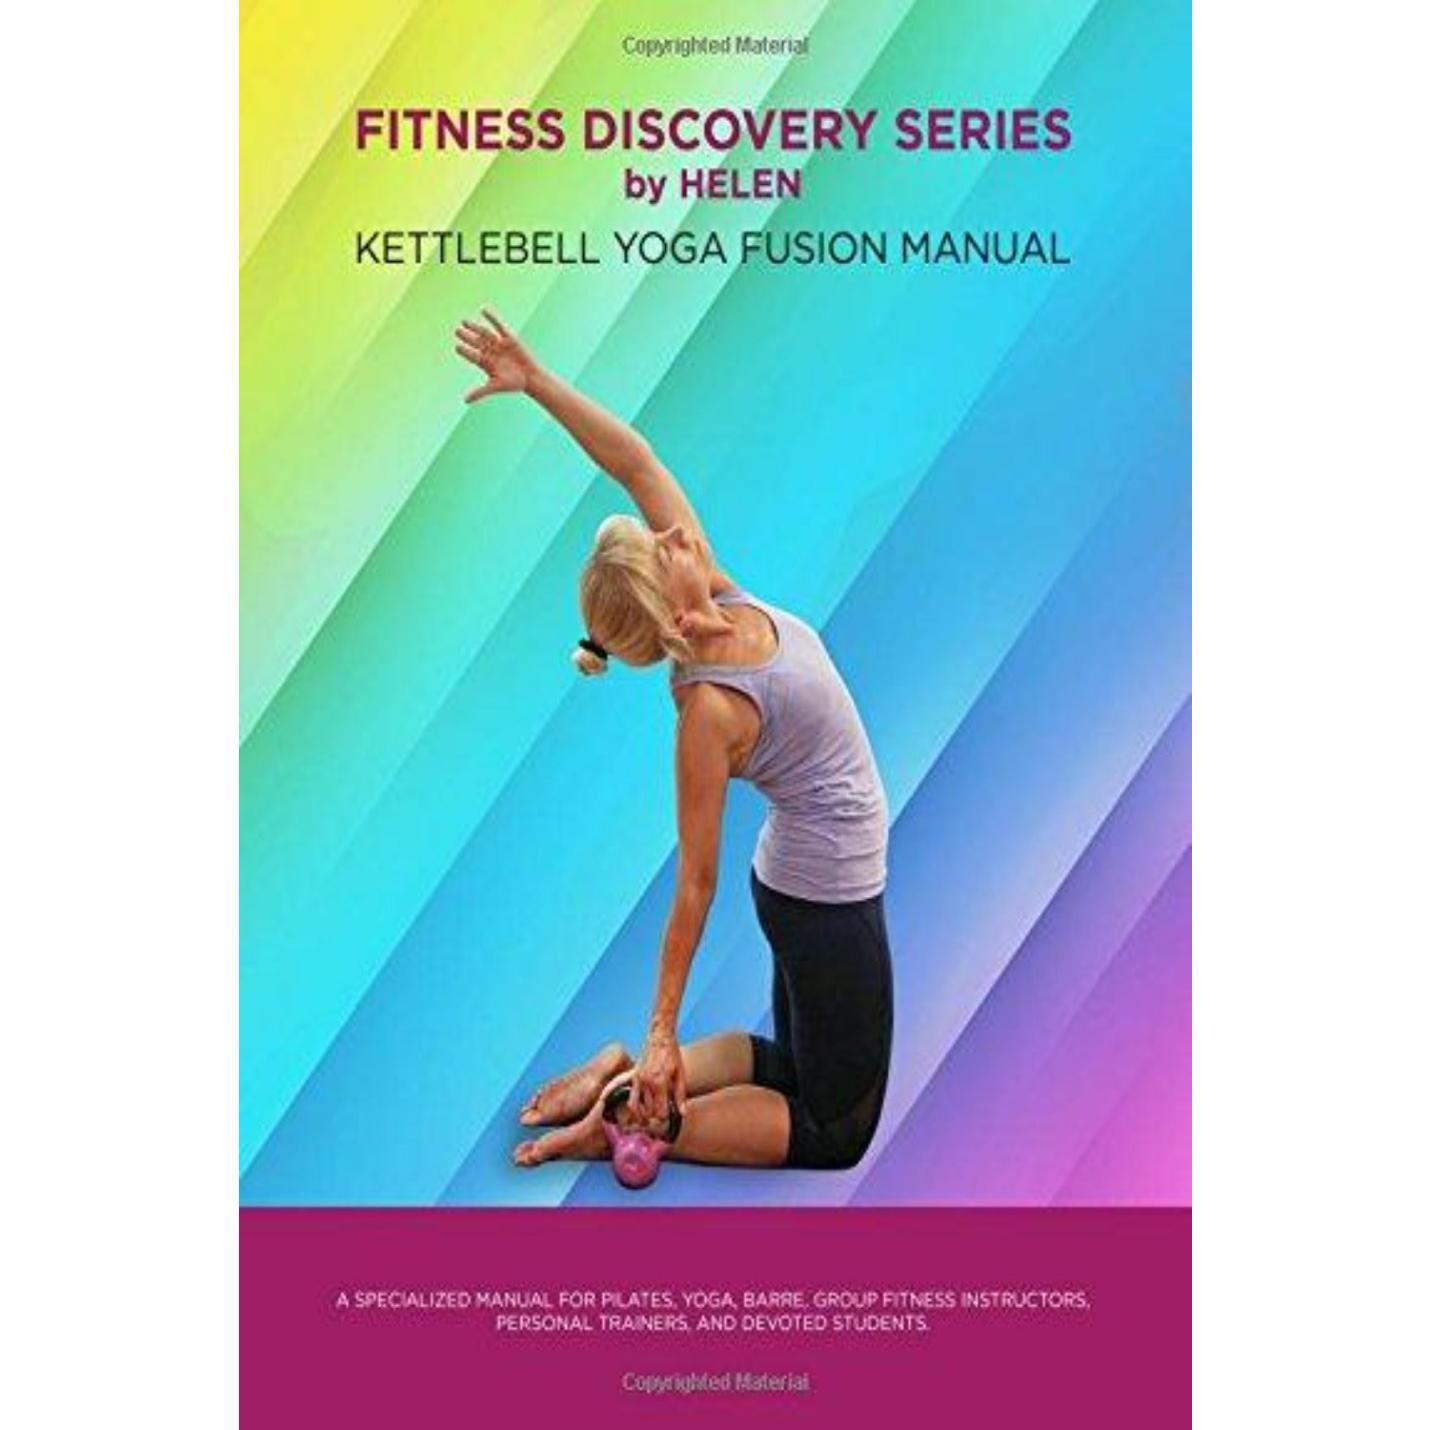 Fitness Discovery Series by Helen - Kettlebell Yoga Fusion Manual